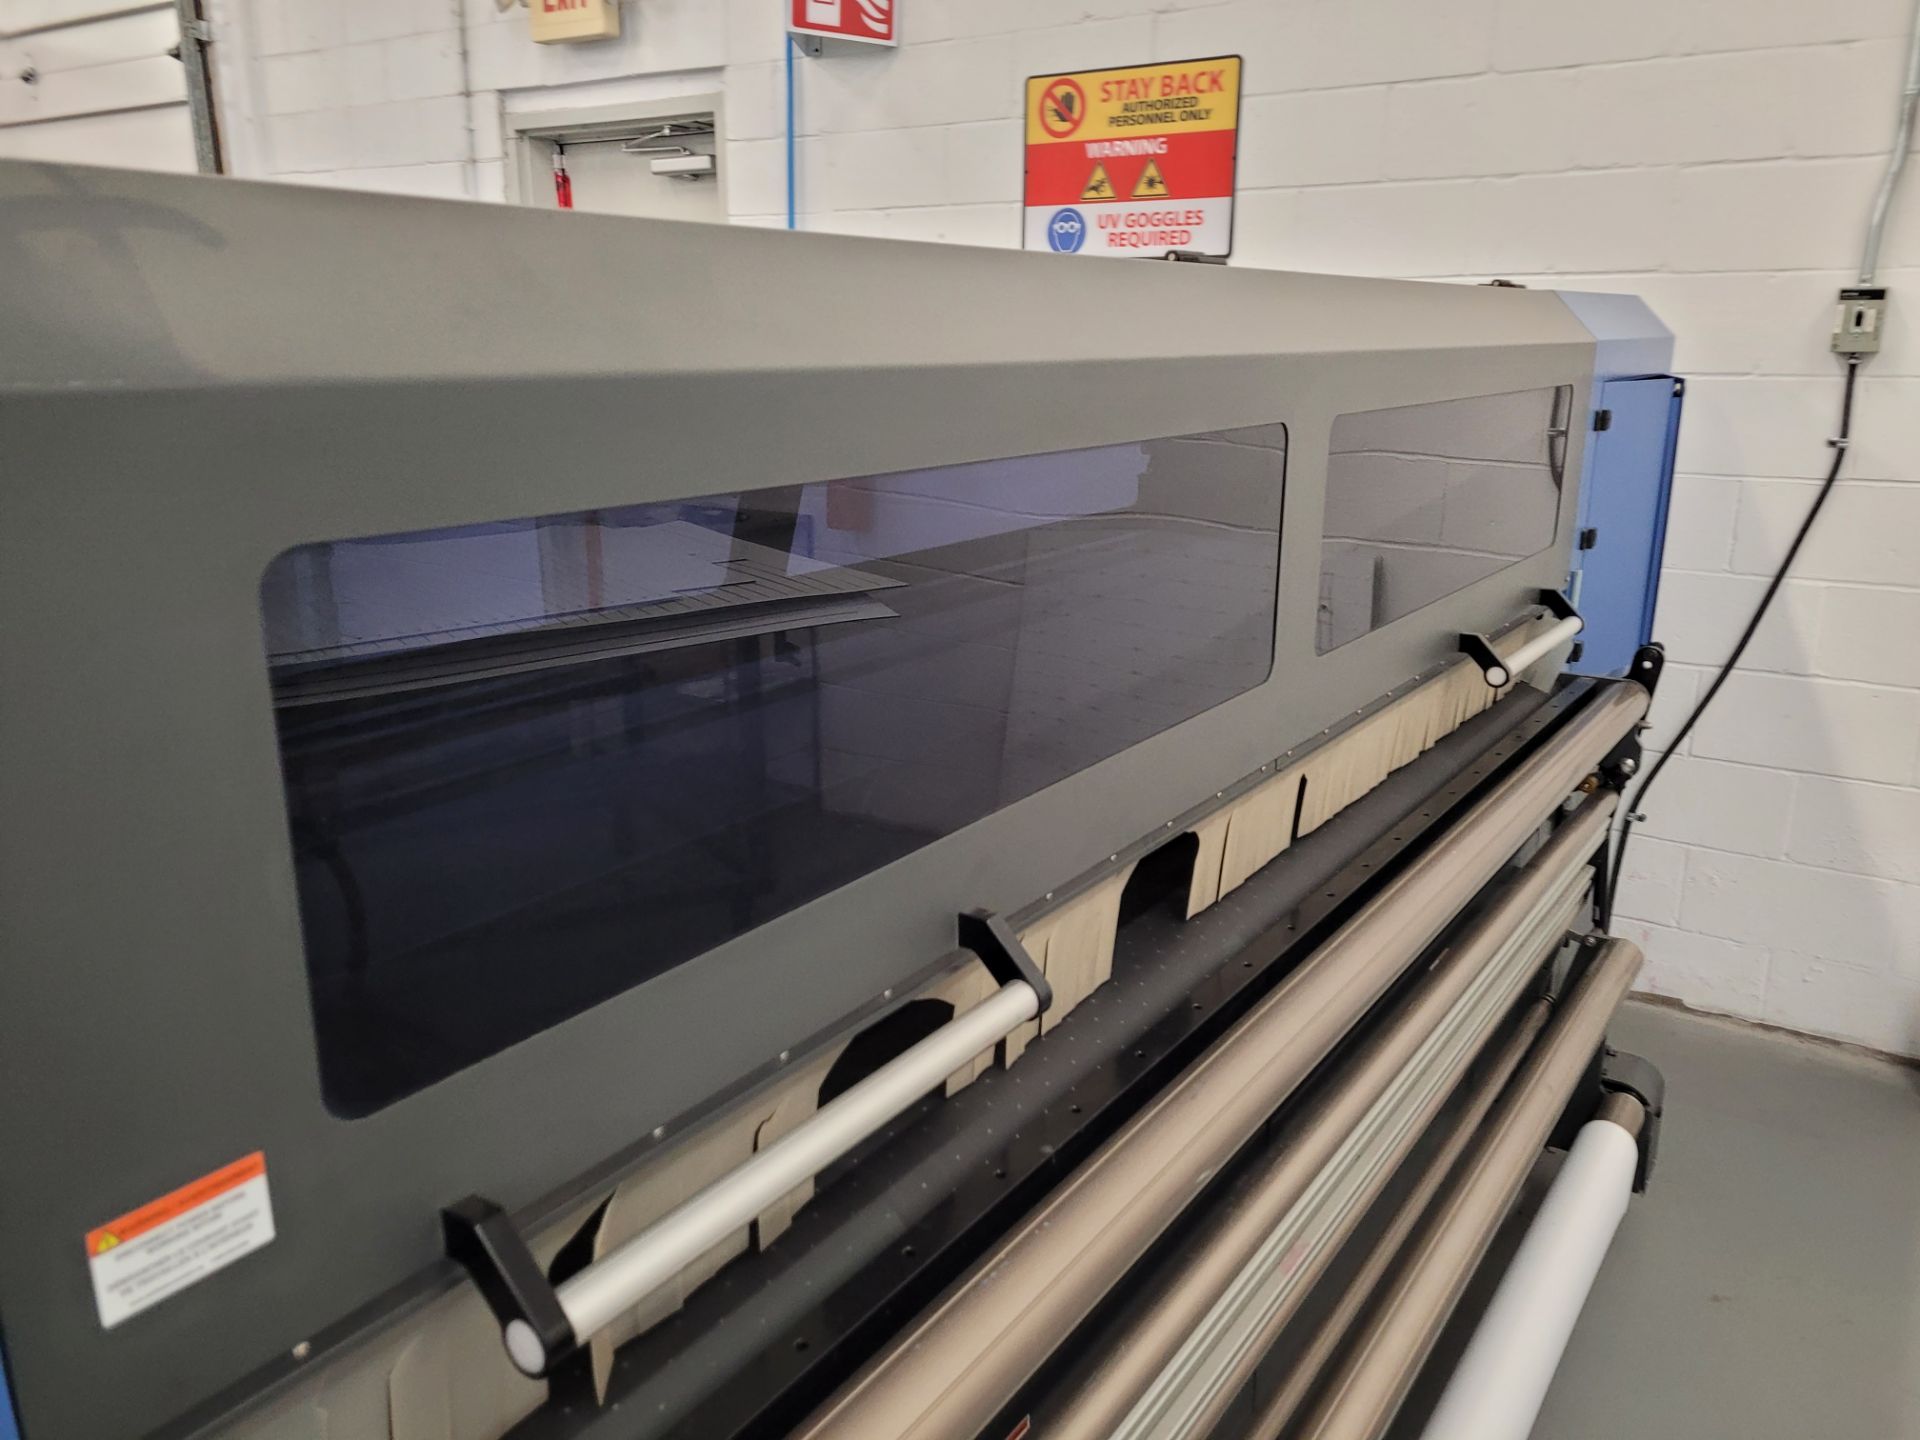 DYSS UV Printing Machine mod. Lasco & Apollo, ser. 221674RR000100264, 220V, includes conveyors and - Image 14 of 37